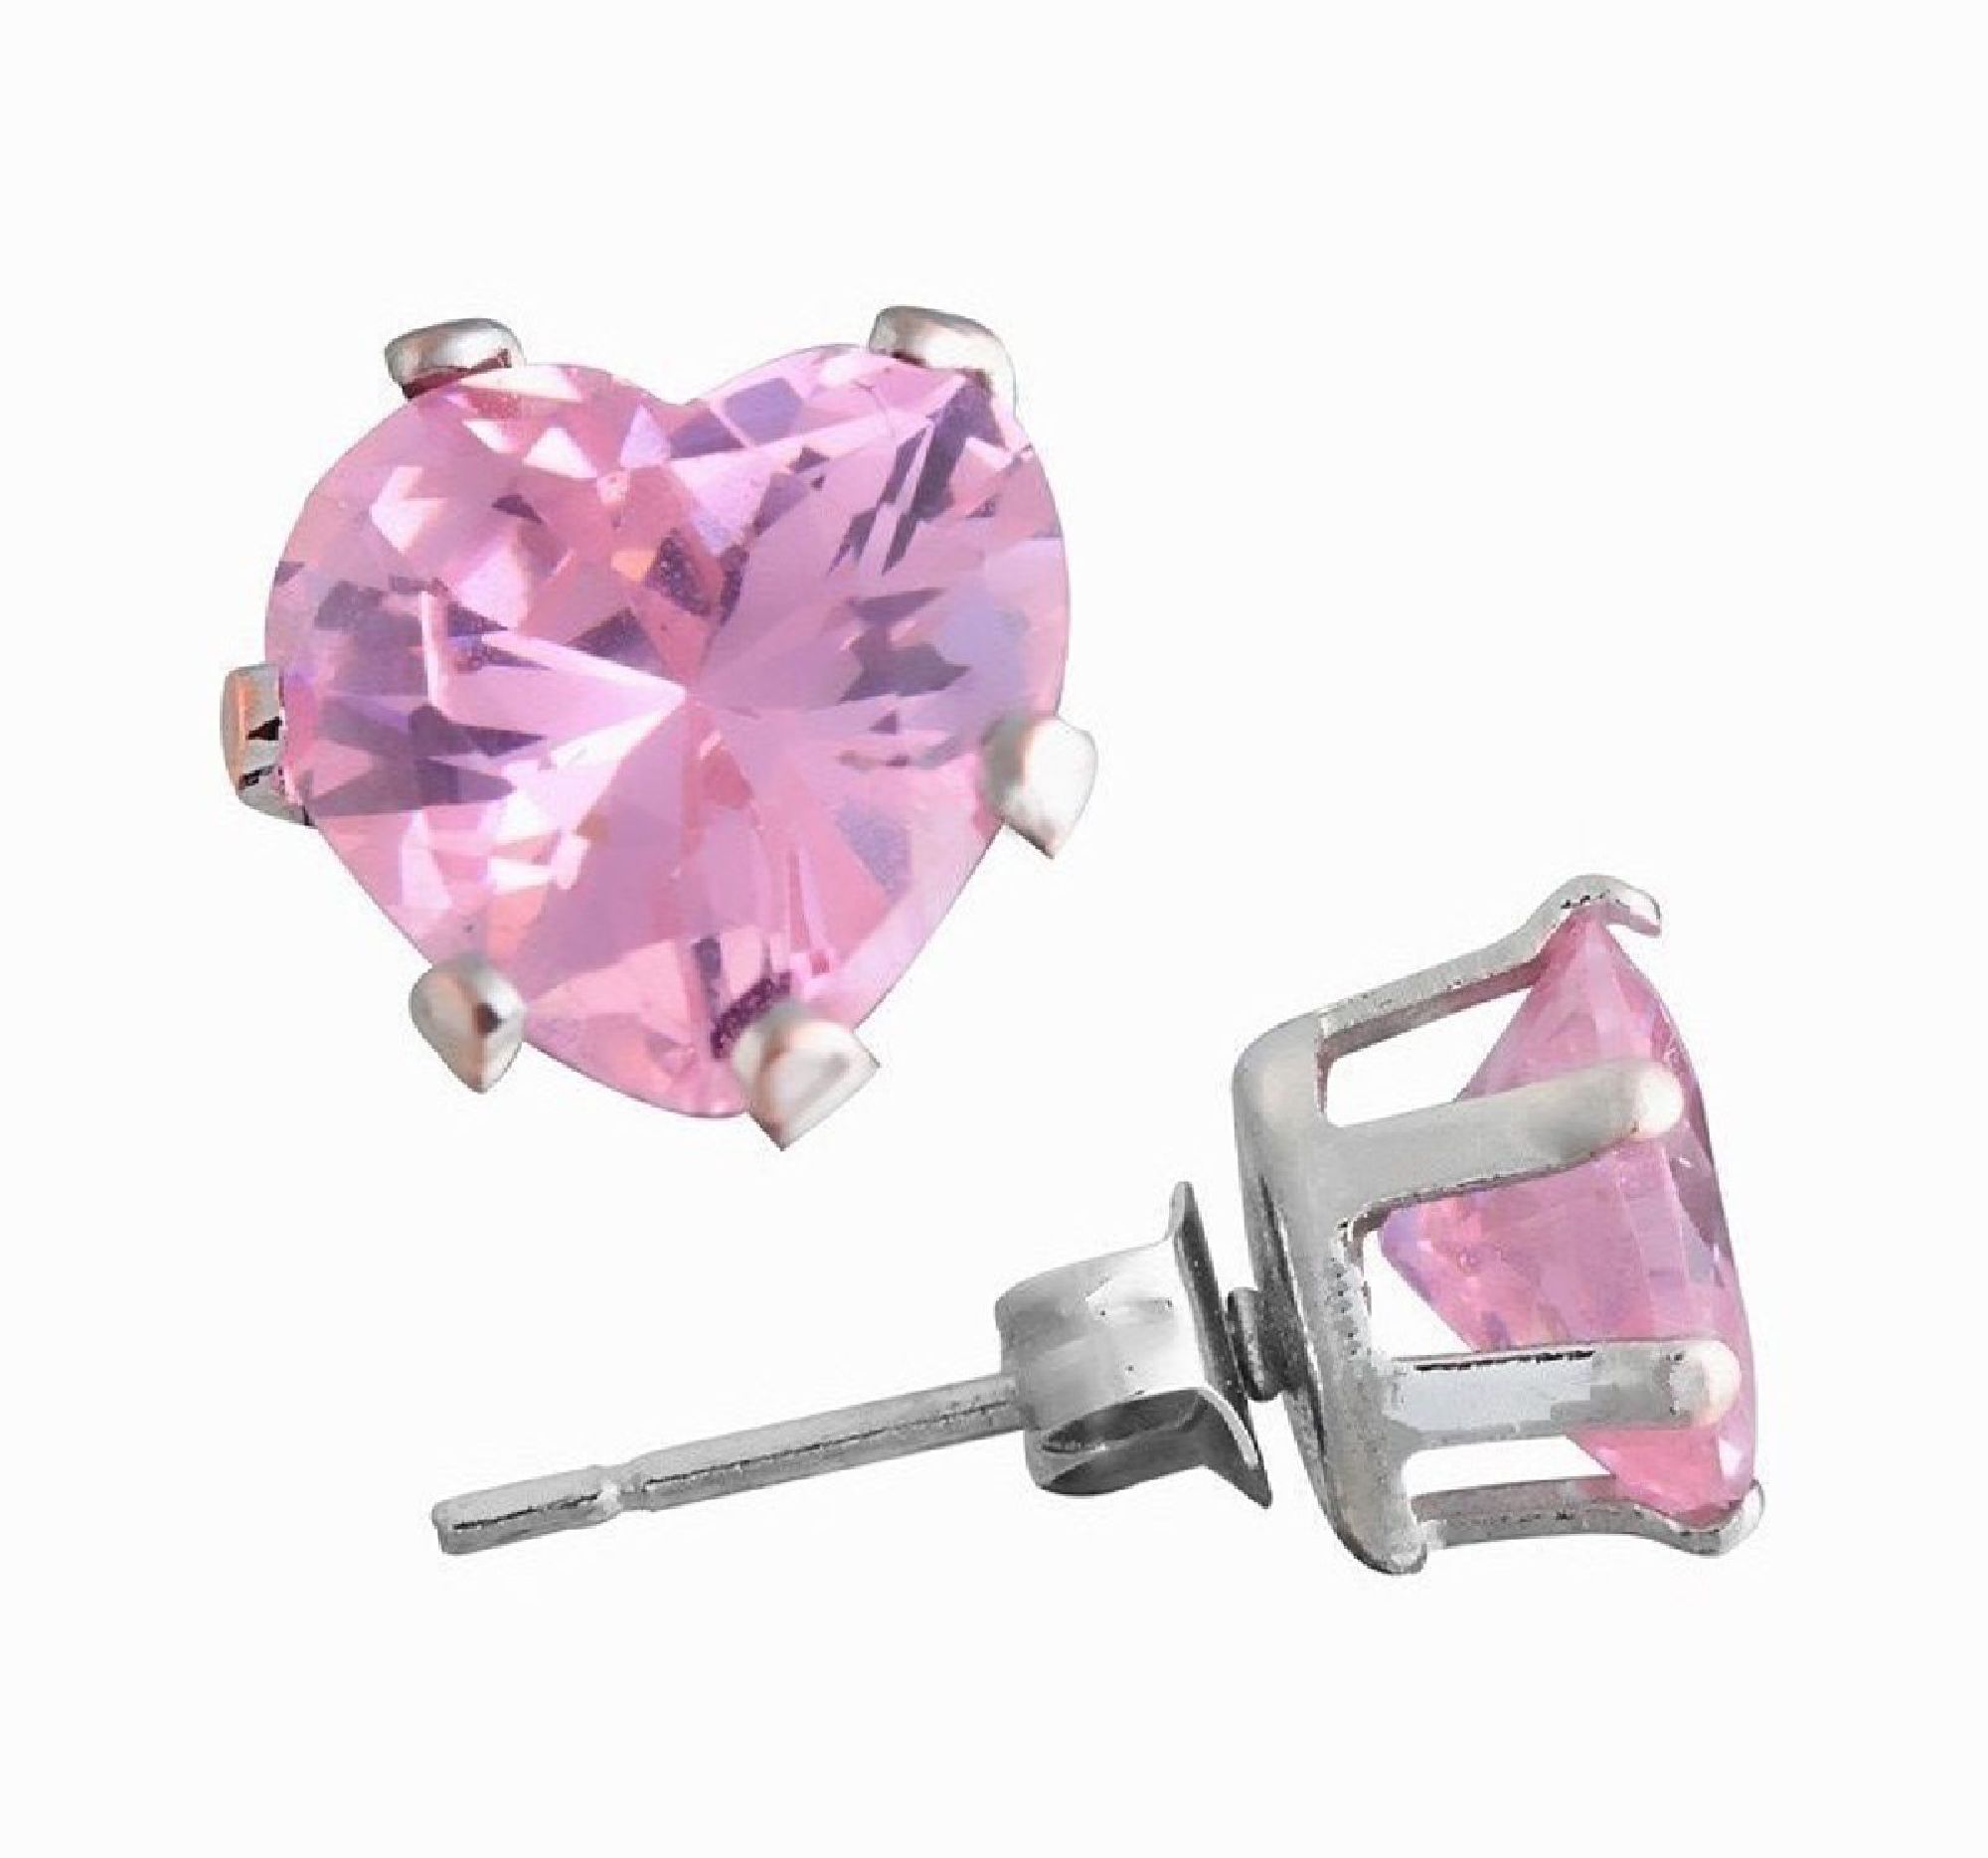 4 Carat Heart Shape Pink Diamond manmade Stud Earrings in Platinum over Sterling Silver Designed in France